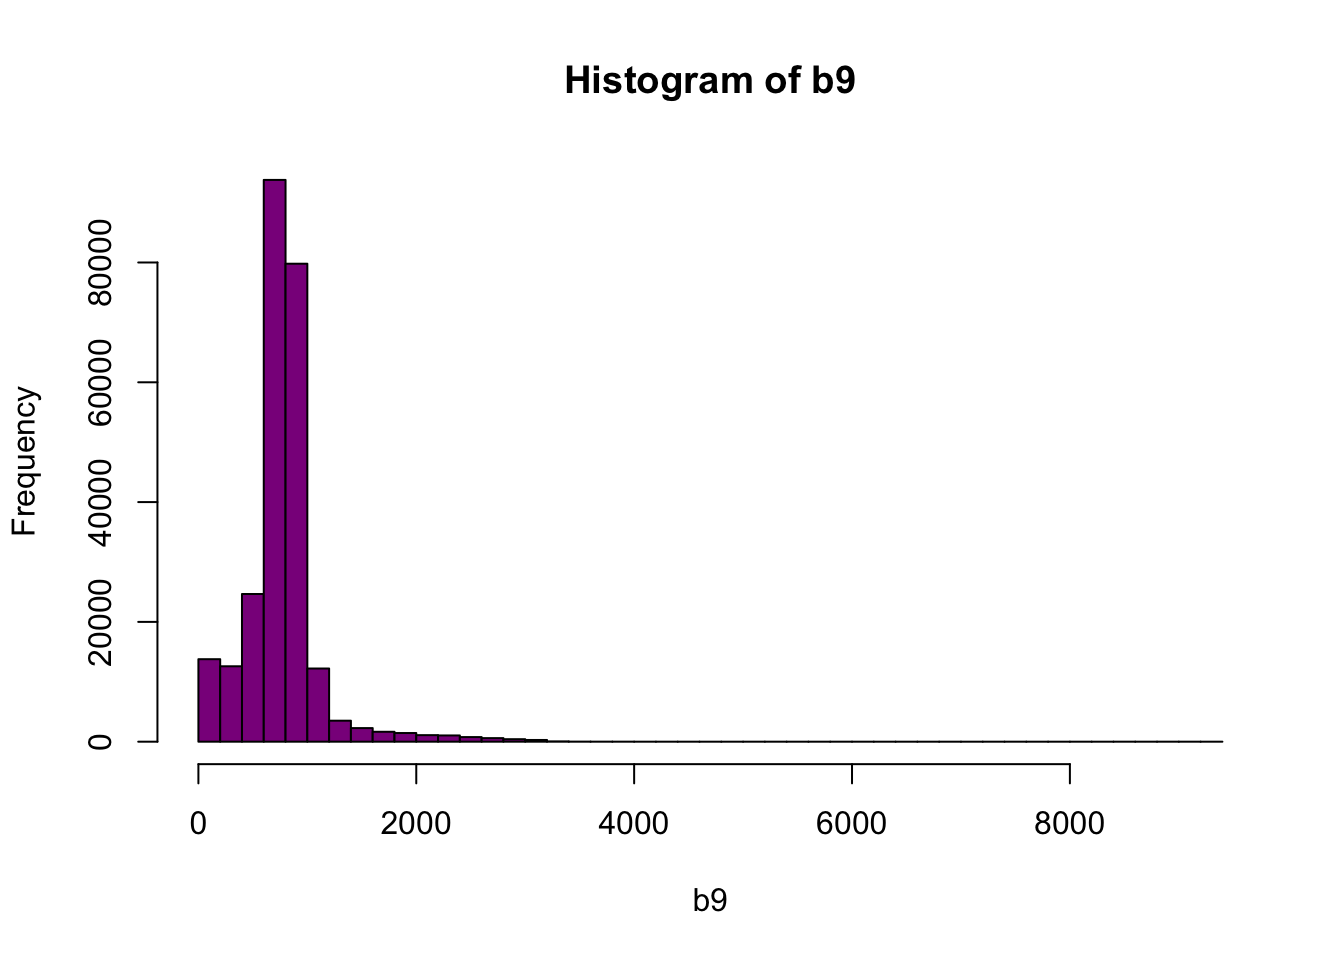 Histogram of reflectance values for band 9. The x-axis represents the reflectance values and ranges from 0 to 8000. The frequency of these values is on the y-axis. The histogram shows reflectance values are skewed to the right, where the majority of the values lie between 0 and 1000. We can conclude that reflectance values are not equally distributed across the range of reflectance values, resulting in a washed out image.